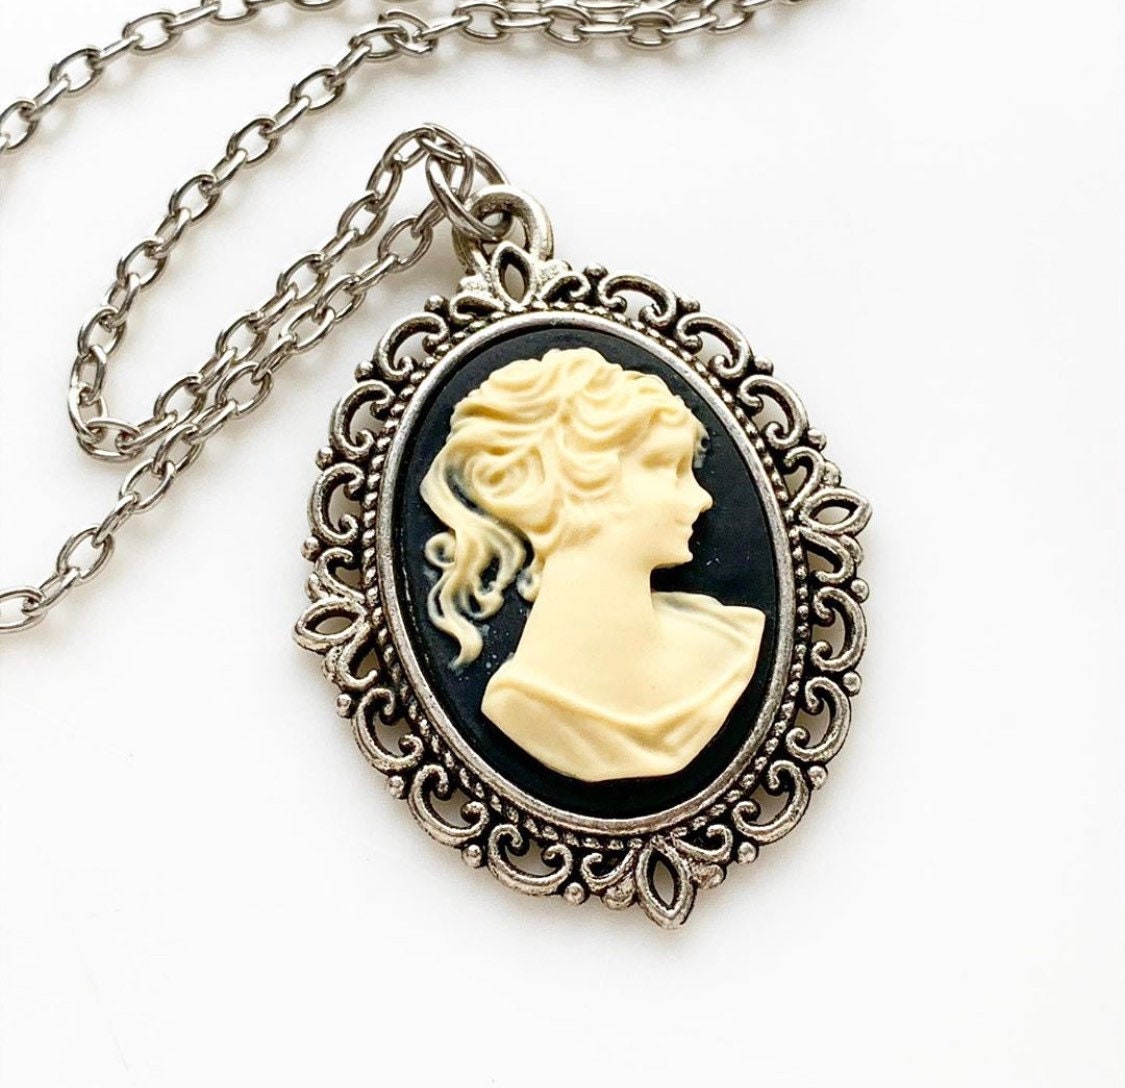 Cameo Necklaces for Women, Lady Cameo Jewelry, Handmade Jewelry